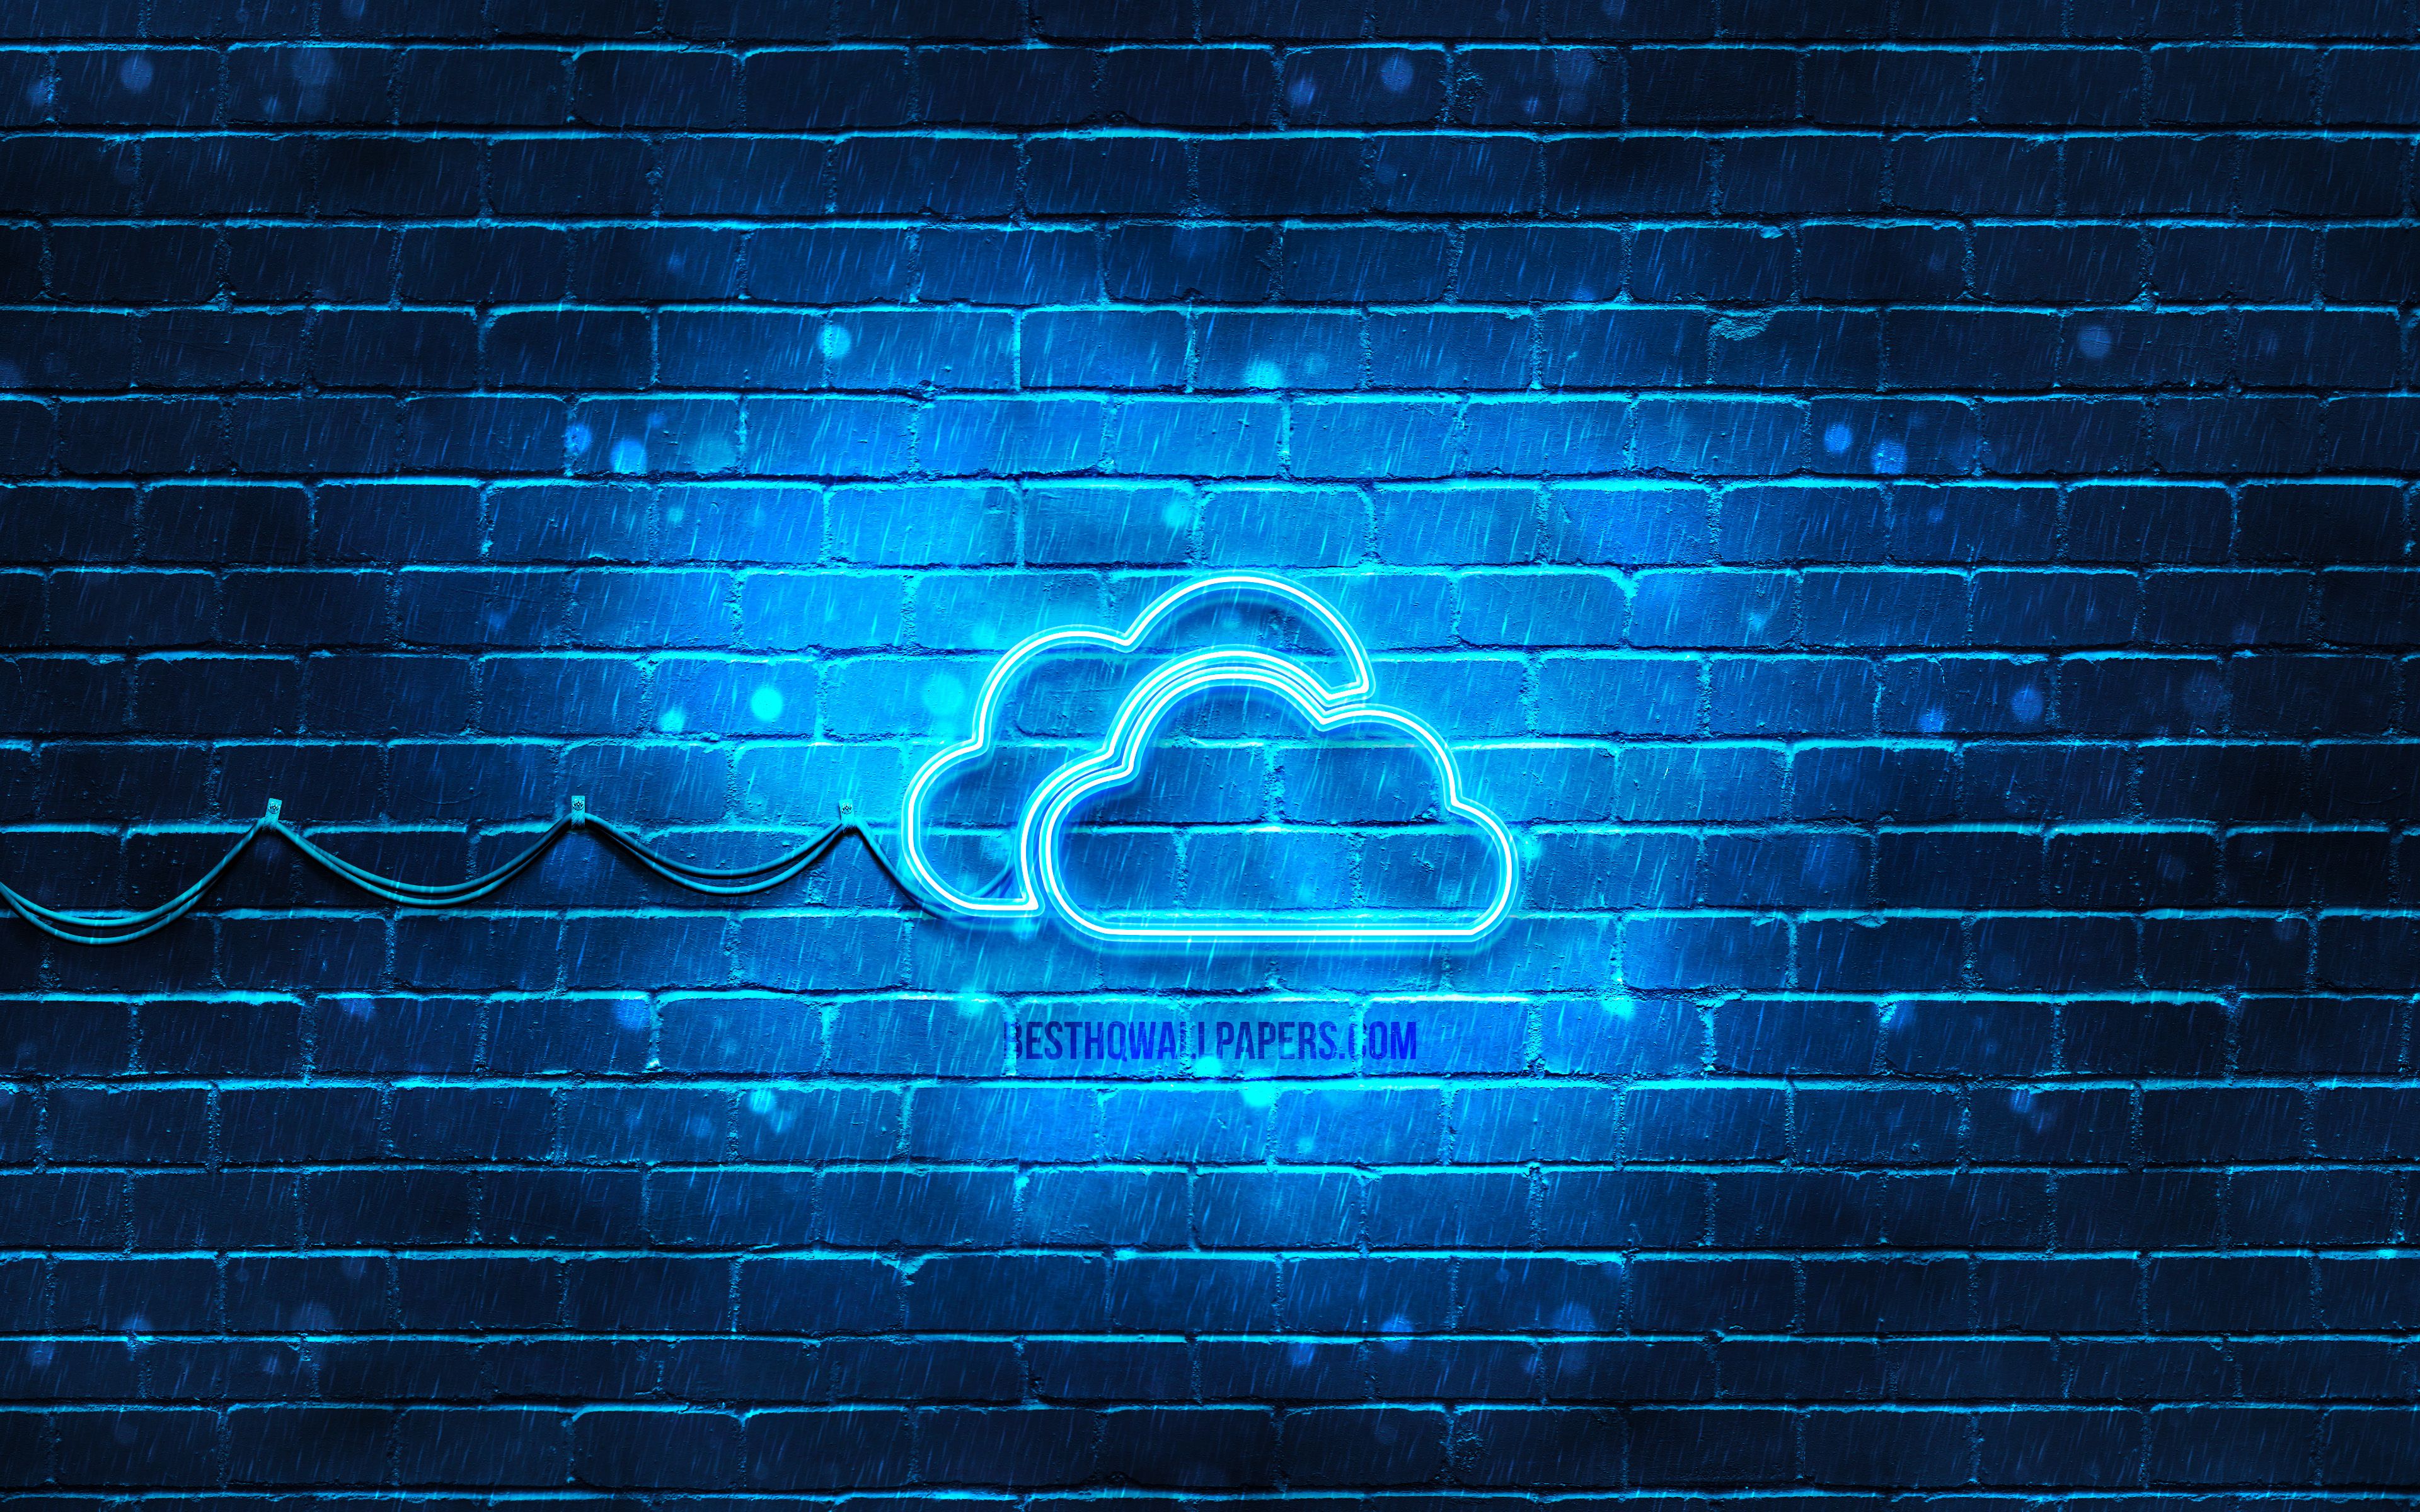 Download wallpaper Clouds neon icon, 4k, blue background, neon symbols, Clouds, creative, neon icons, Clouds sign, computer signs, Clouds icon, computer icons for desktop with resolution 3840x2400. High Quality HD picture wallpaper